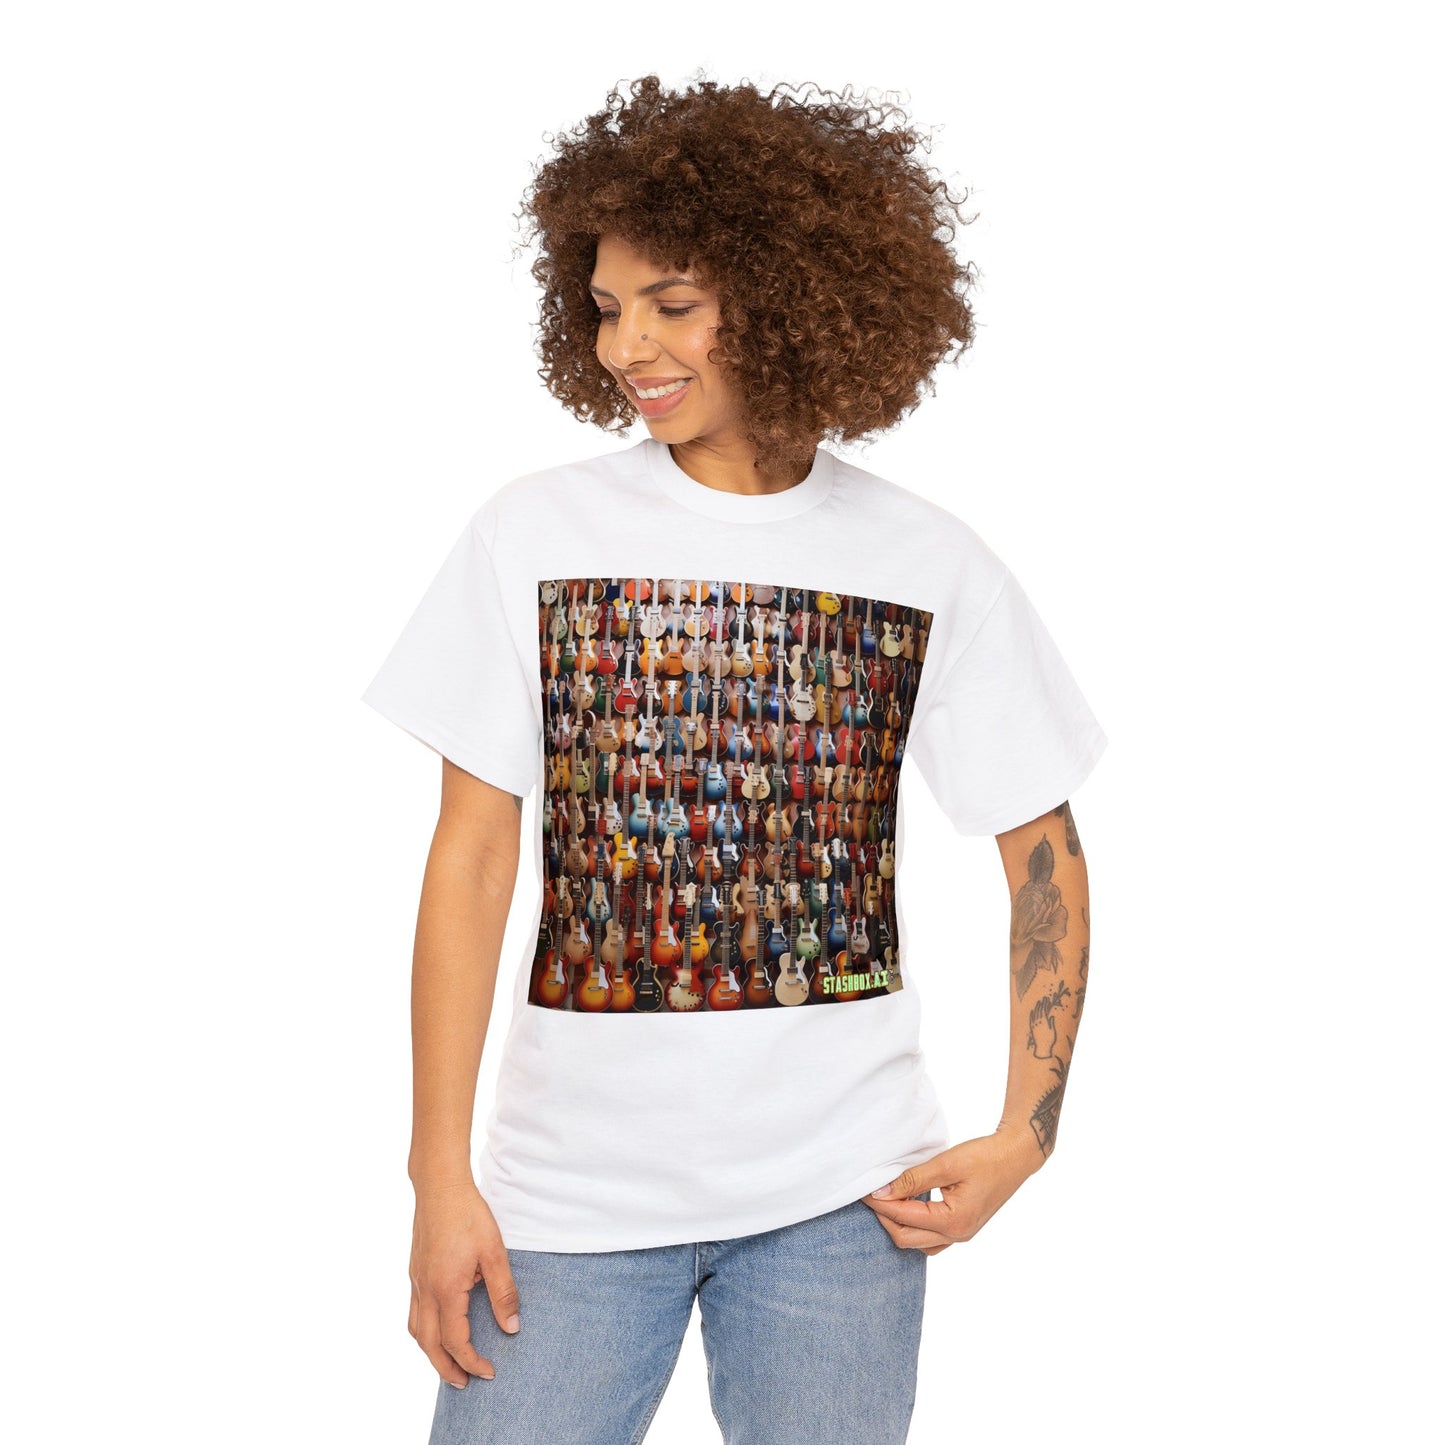 Unisex Adult Size Heavy Cotton Tee Wall of Guitars 005 T-Shirt